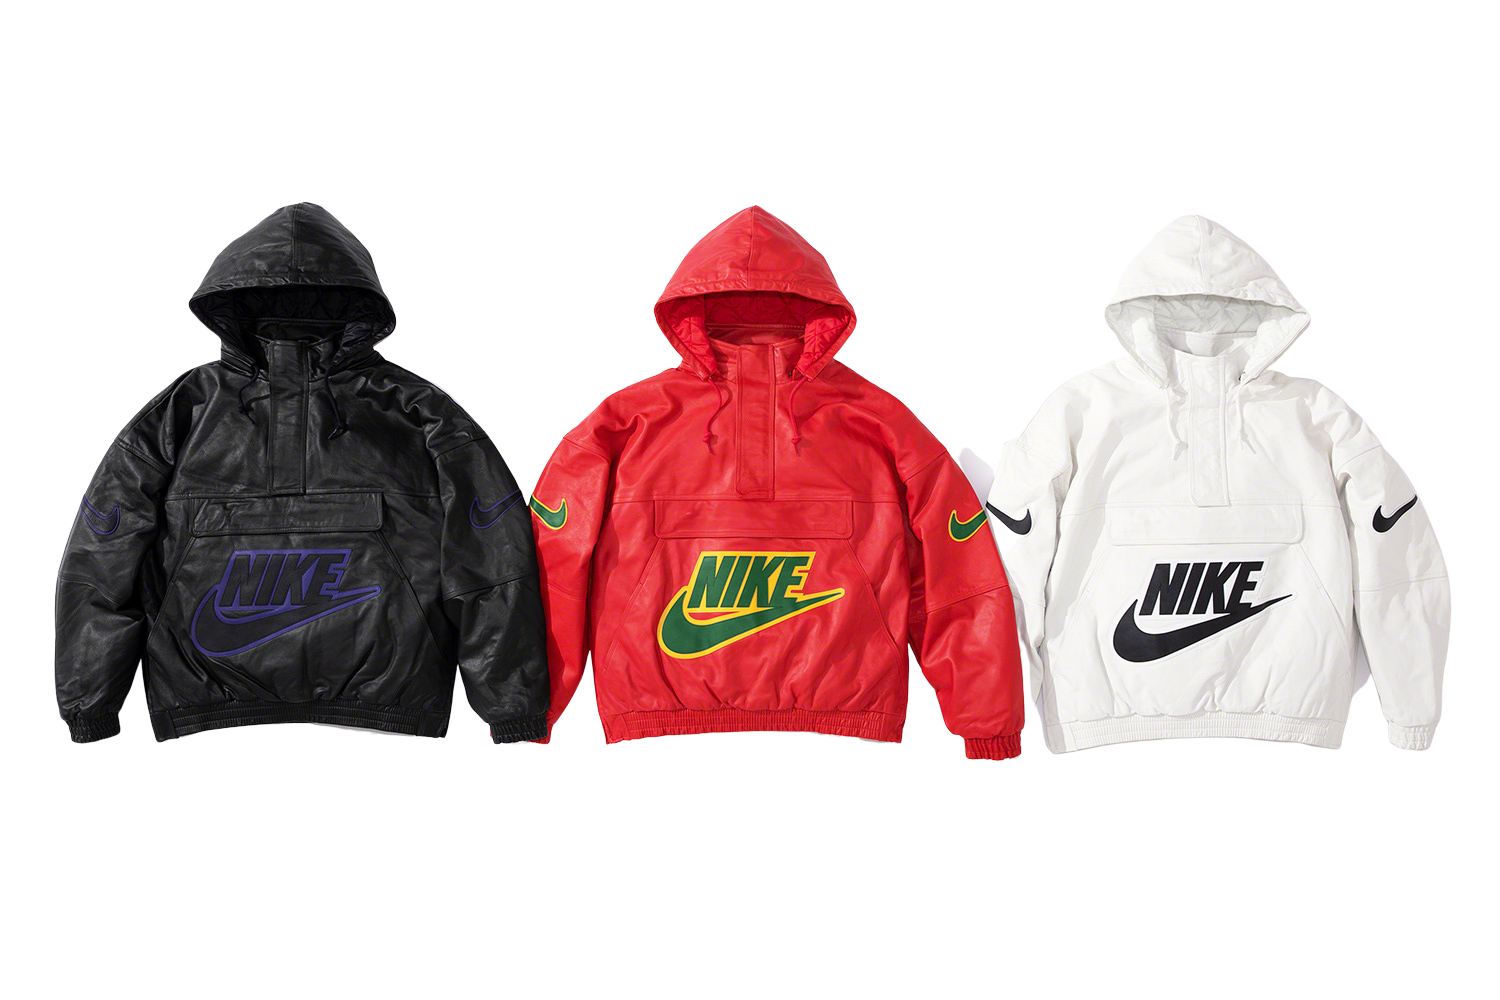 Supreme - Supreme®/Nike® This Fall, Supreme has worked with Nike on a  collection consisting of a Leather Anorak, Leather Baseball Jersey, Leather  Warm Up Pant, Hooded Sweatshirt, Leather Duffle Bag, 14K Gold